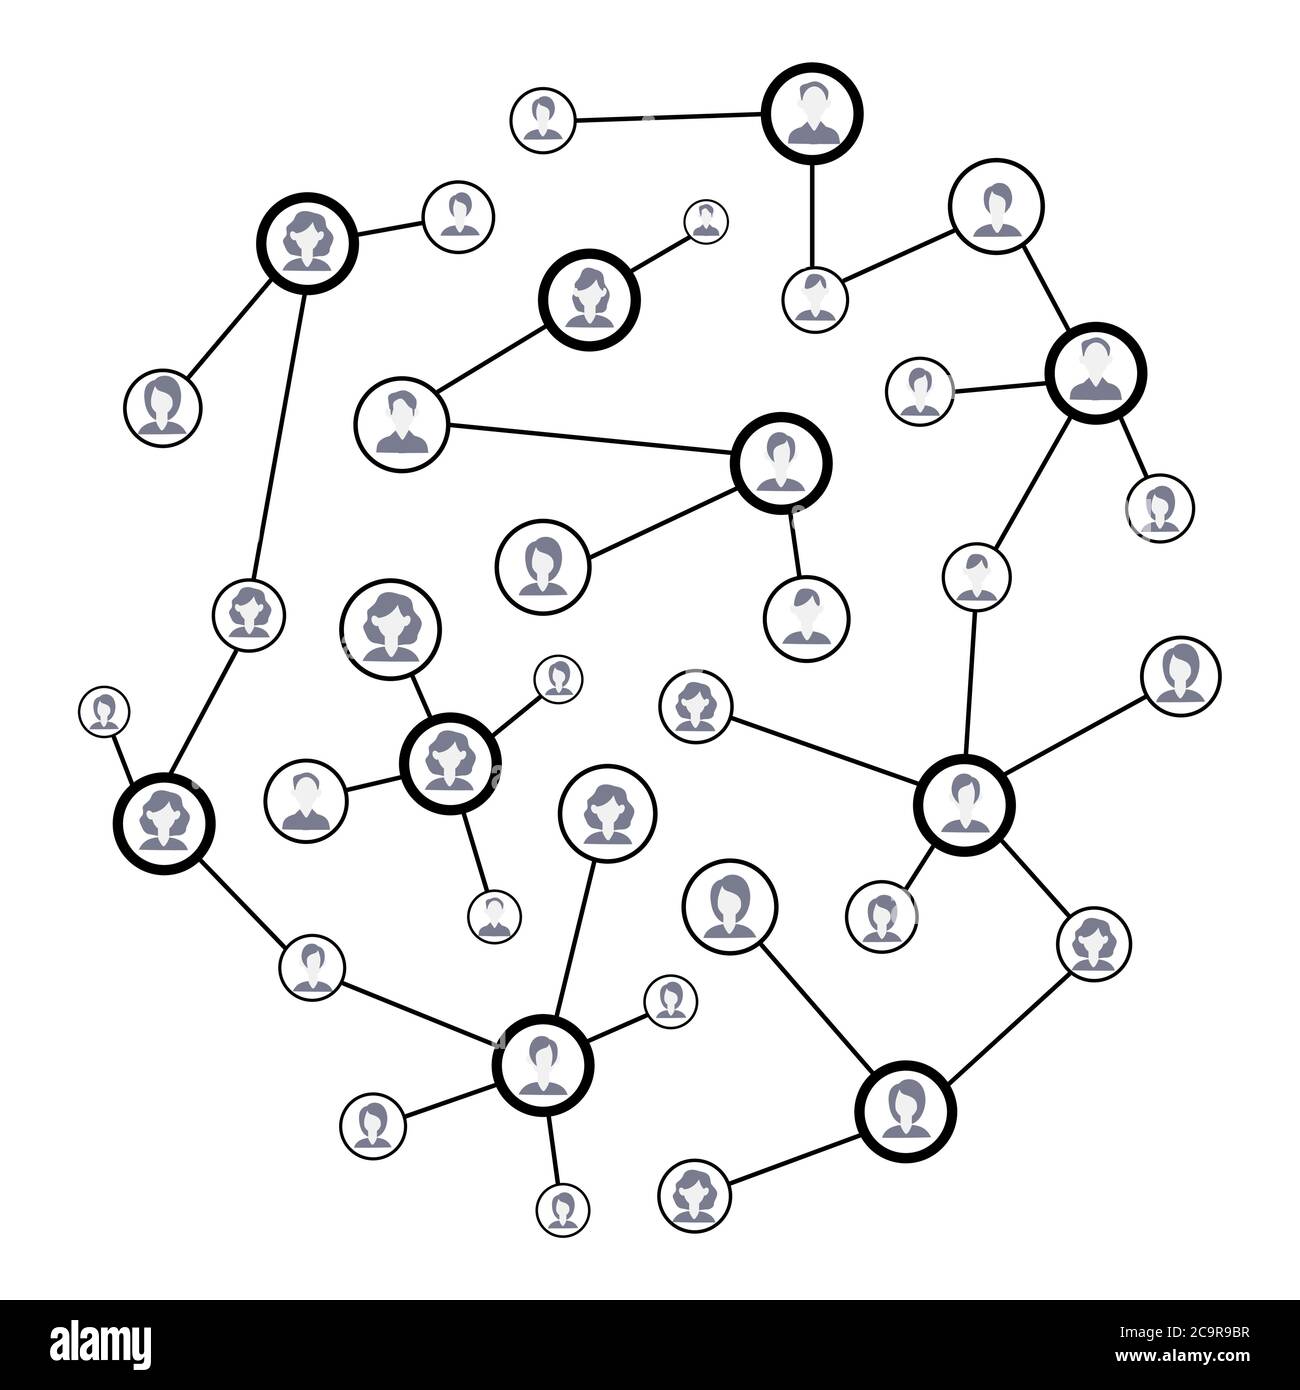 Online wireframe networking contact, global cloud gathering, friendship socialization, technology community connection. Vector black white social web, Stock Vector